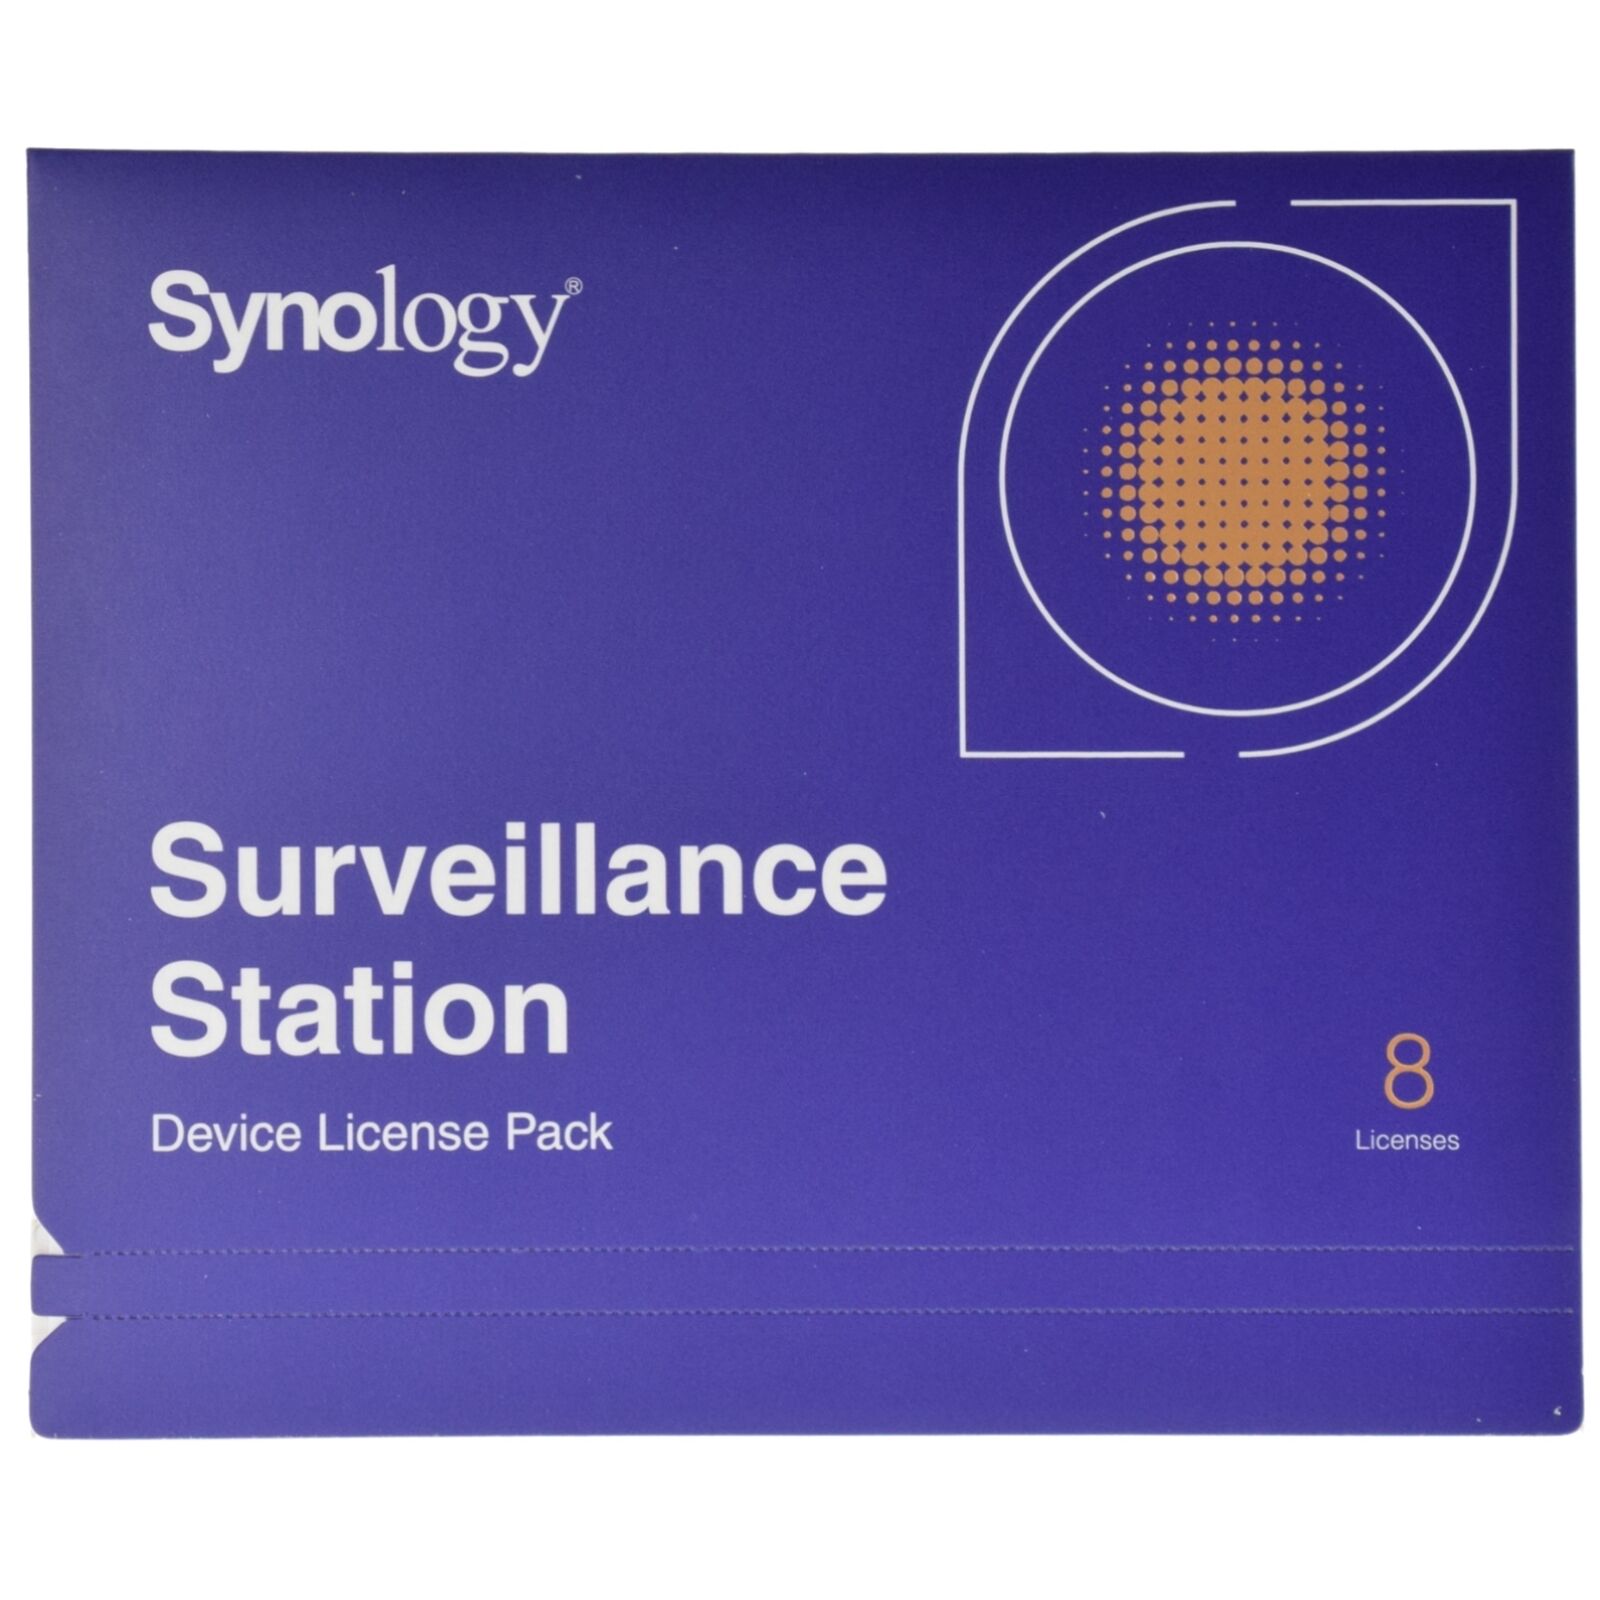 Synology IP Camera 8-License Pack Kit for Surveillance Station - All-Bays NAS